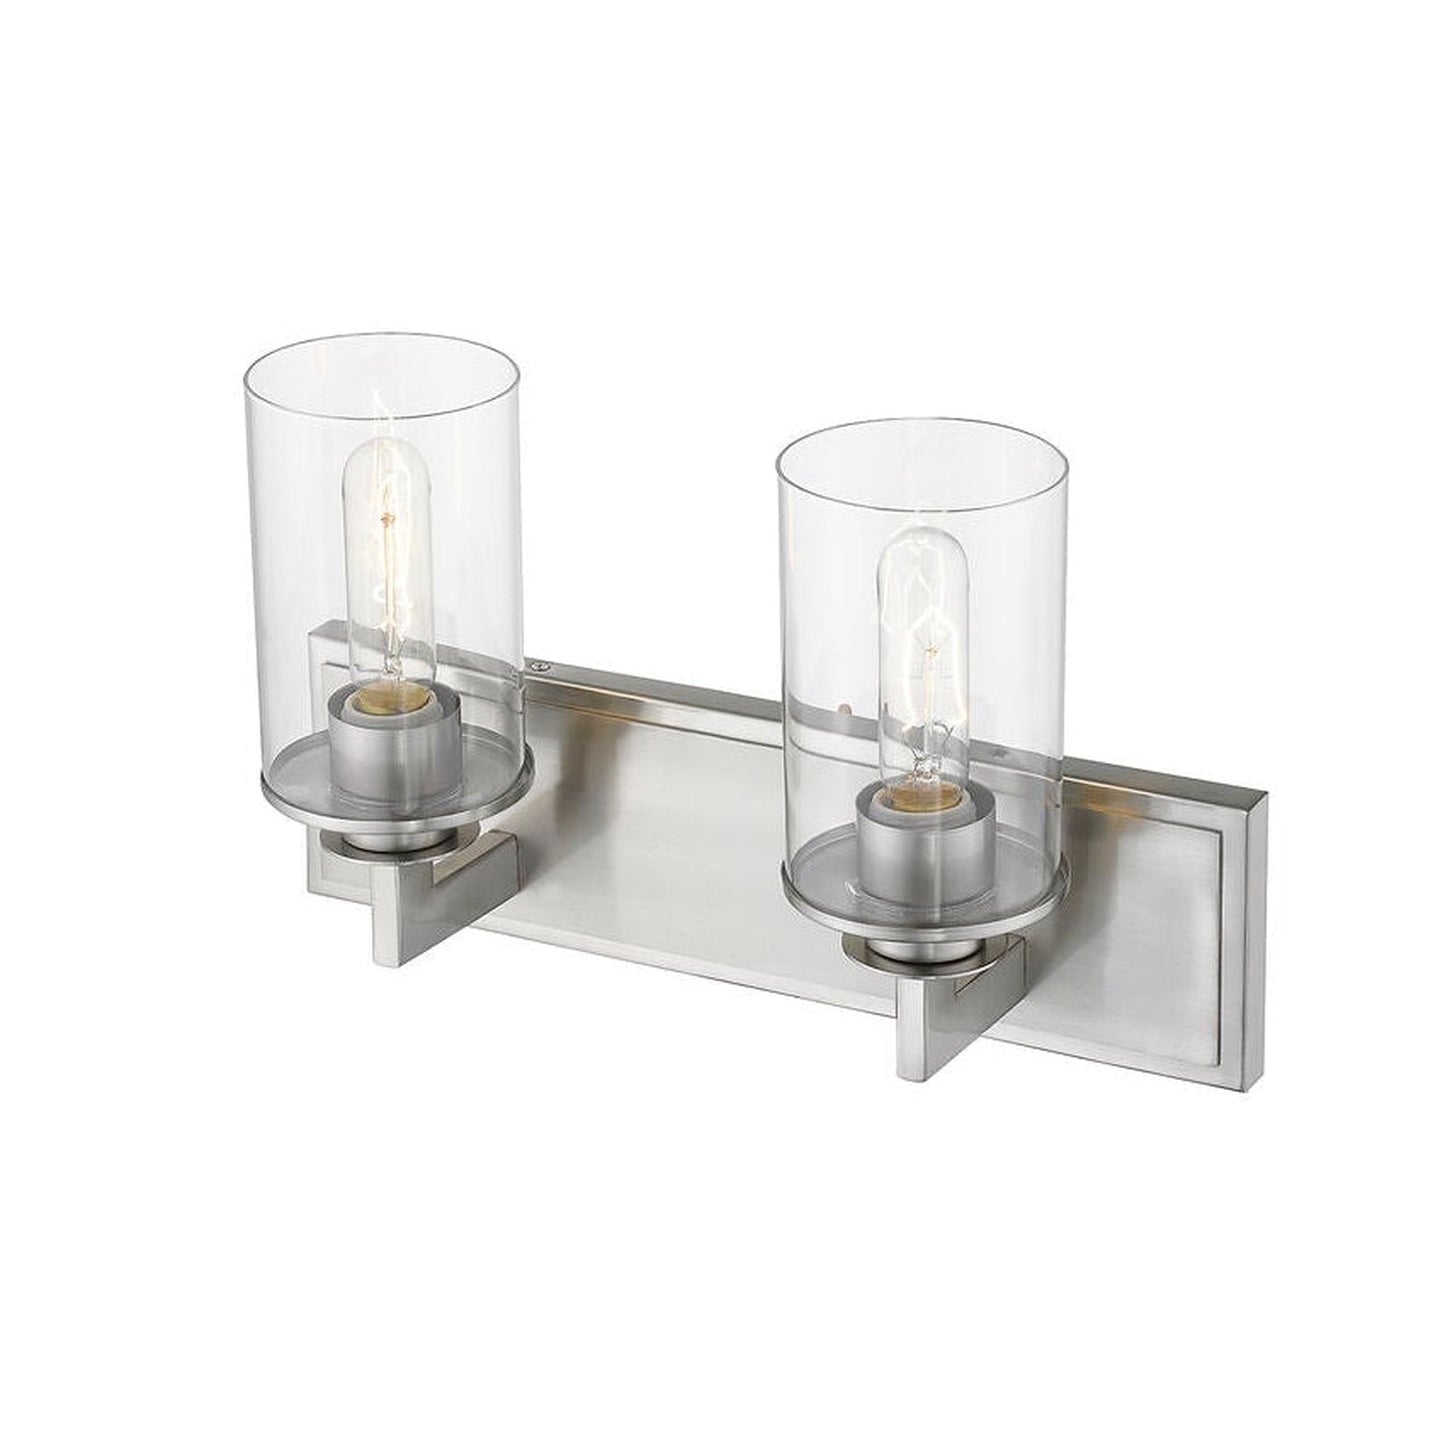 Z-Lite Savannah 16" 2-Light Brushed Nickel Vanity Light With Clear Glass Shade